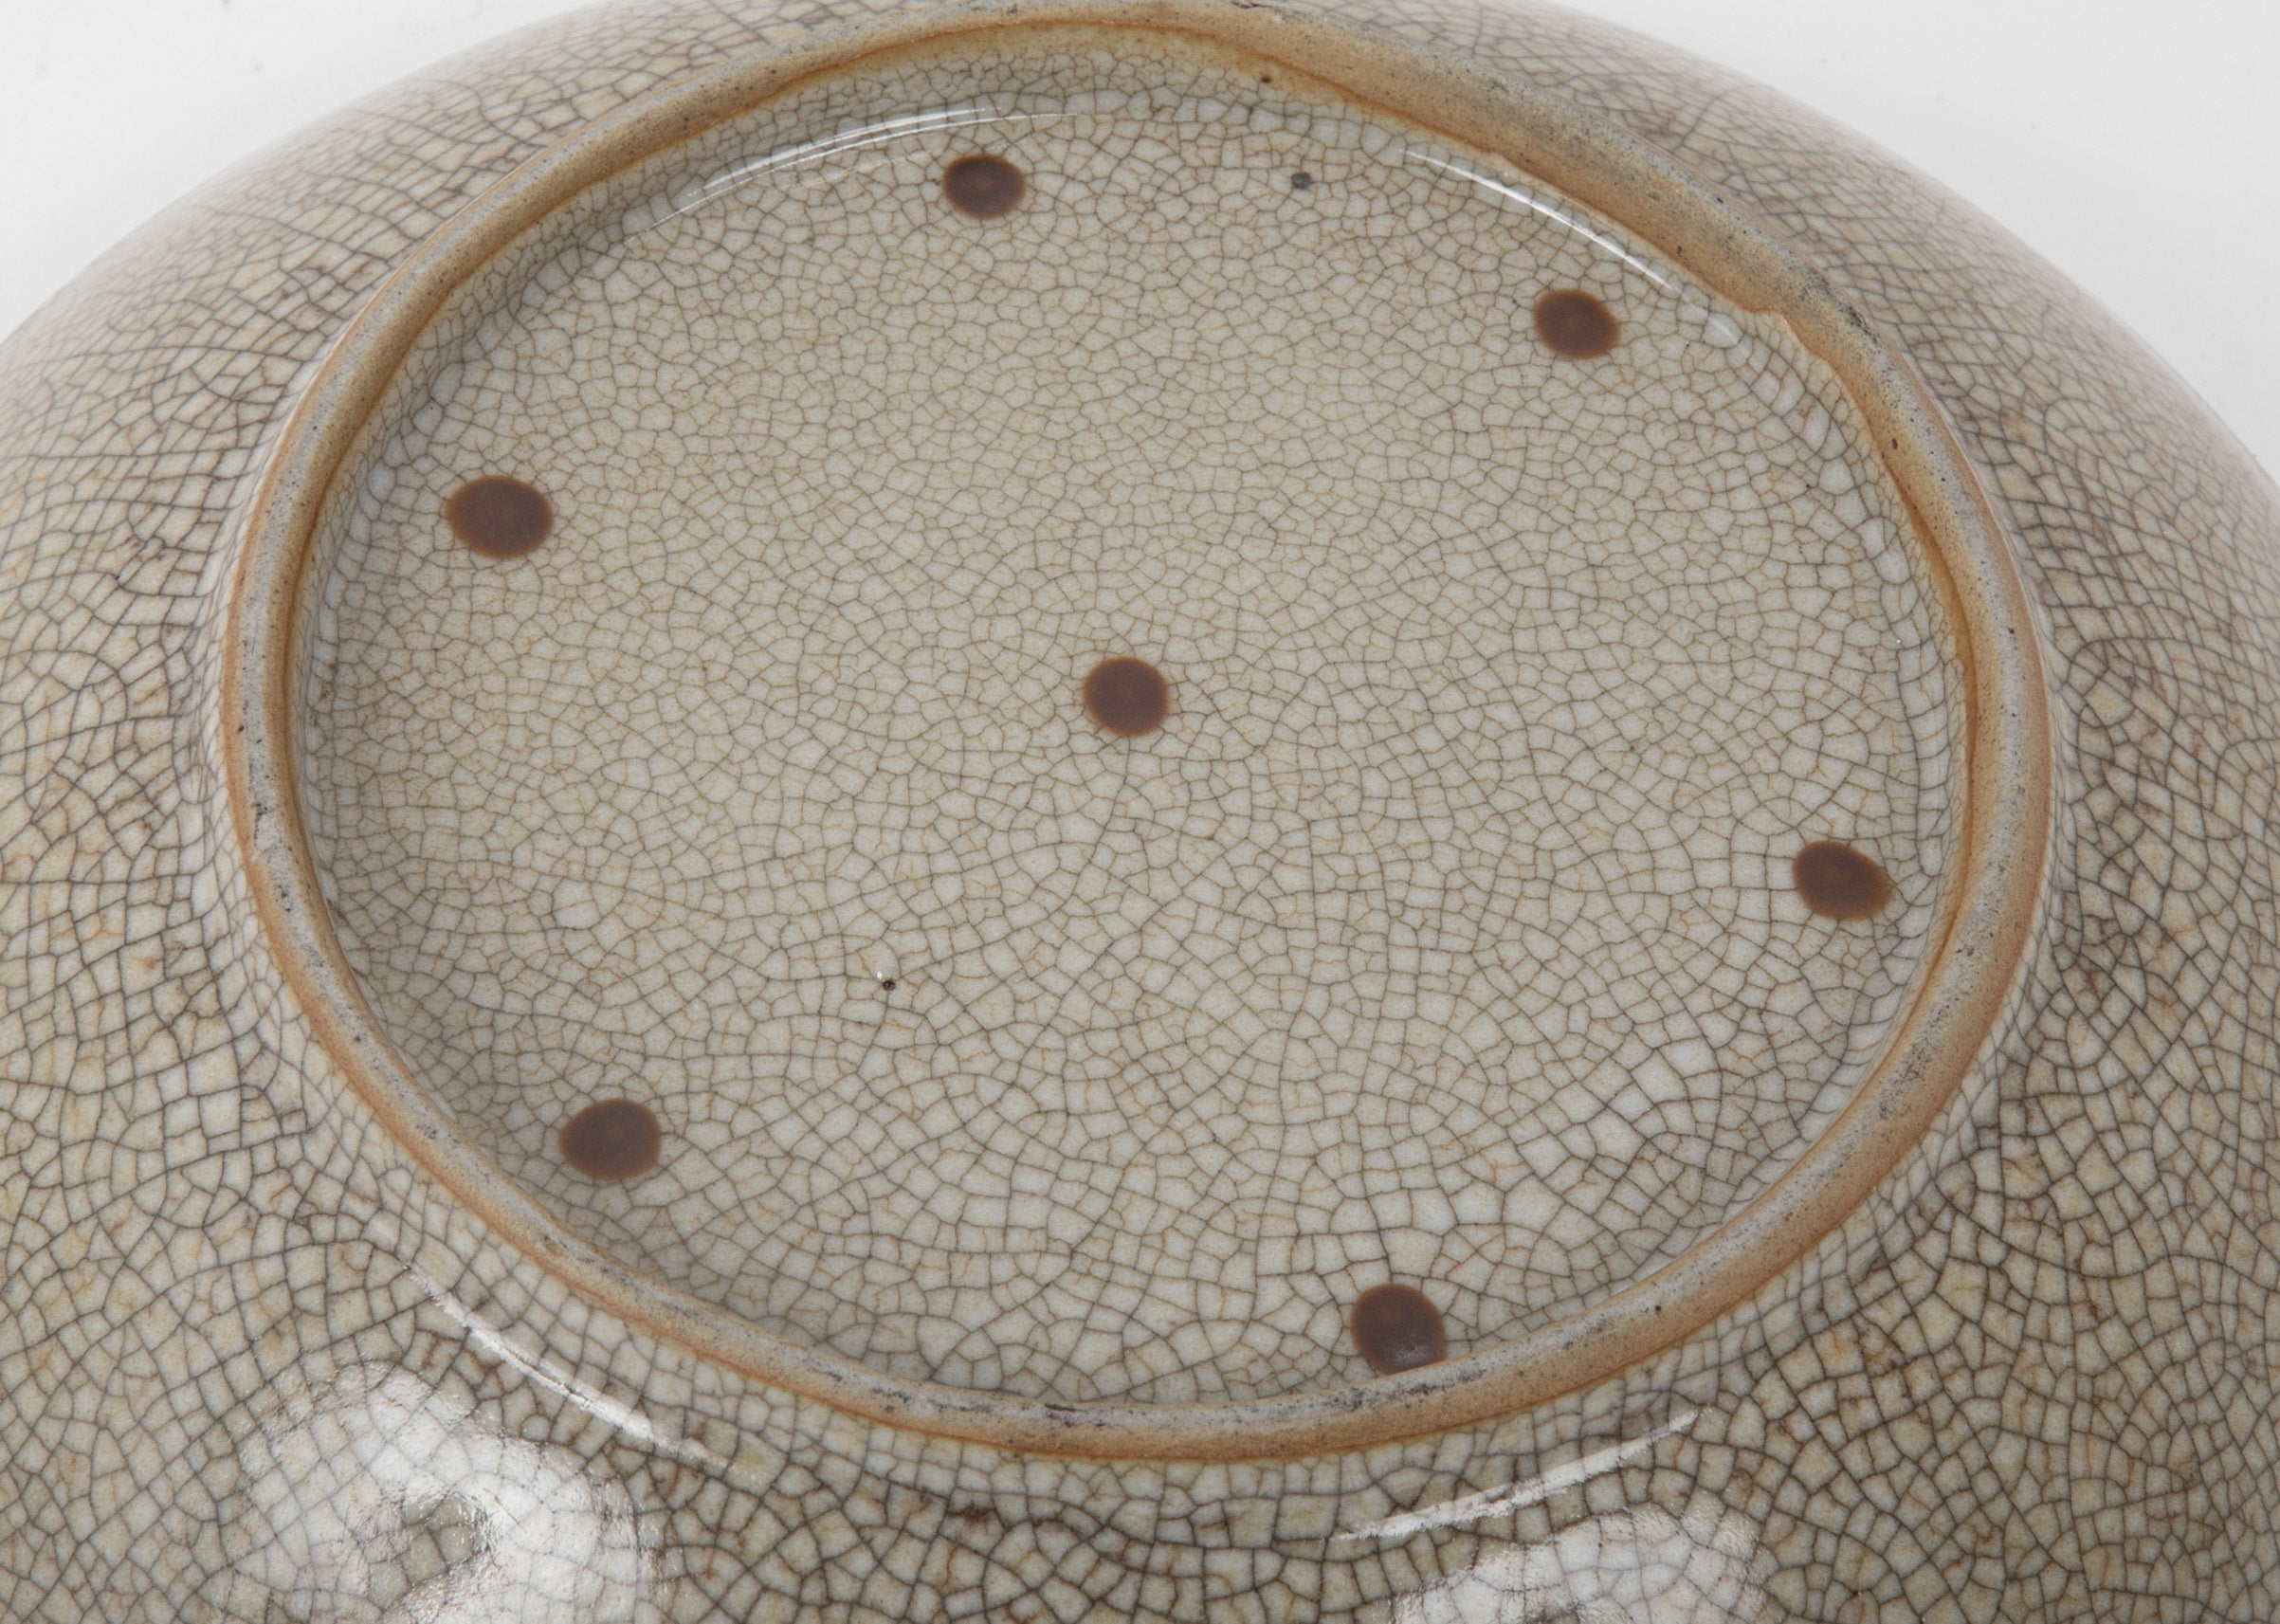 Chinese Crackle Ware Dish